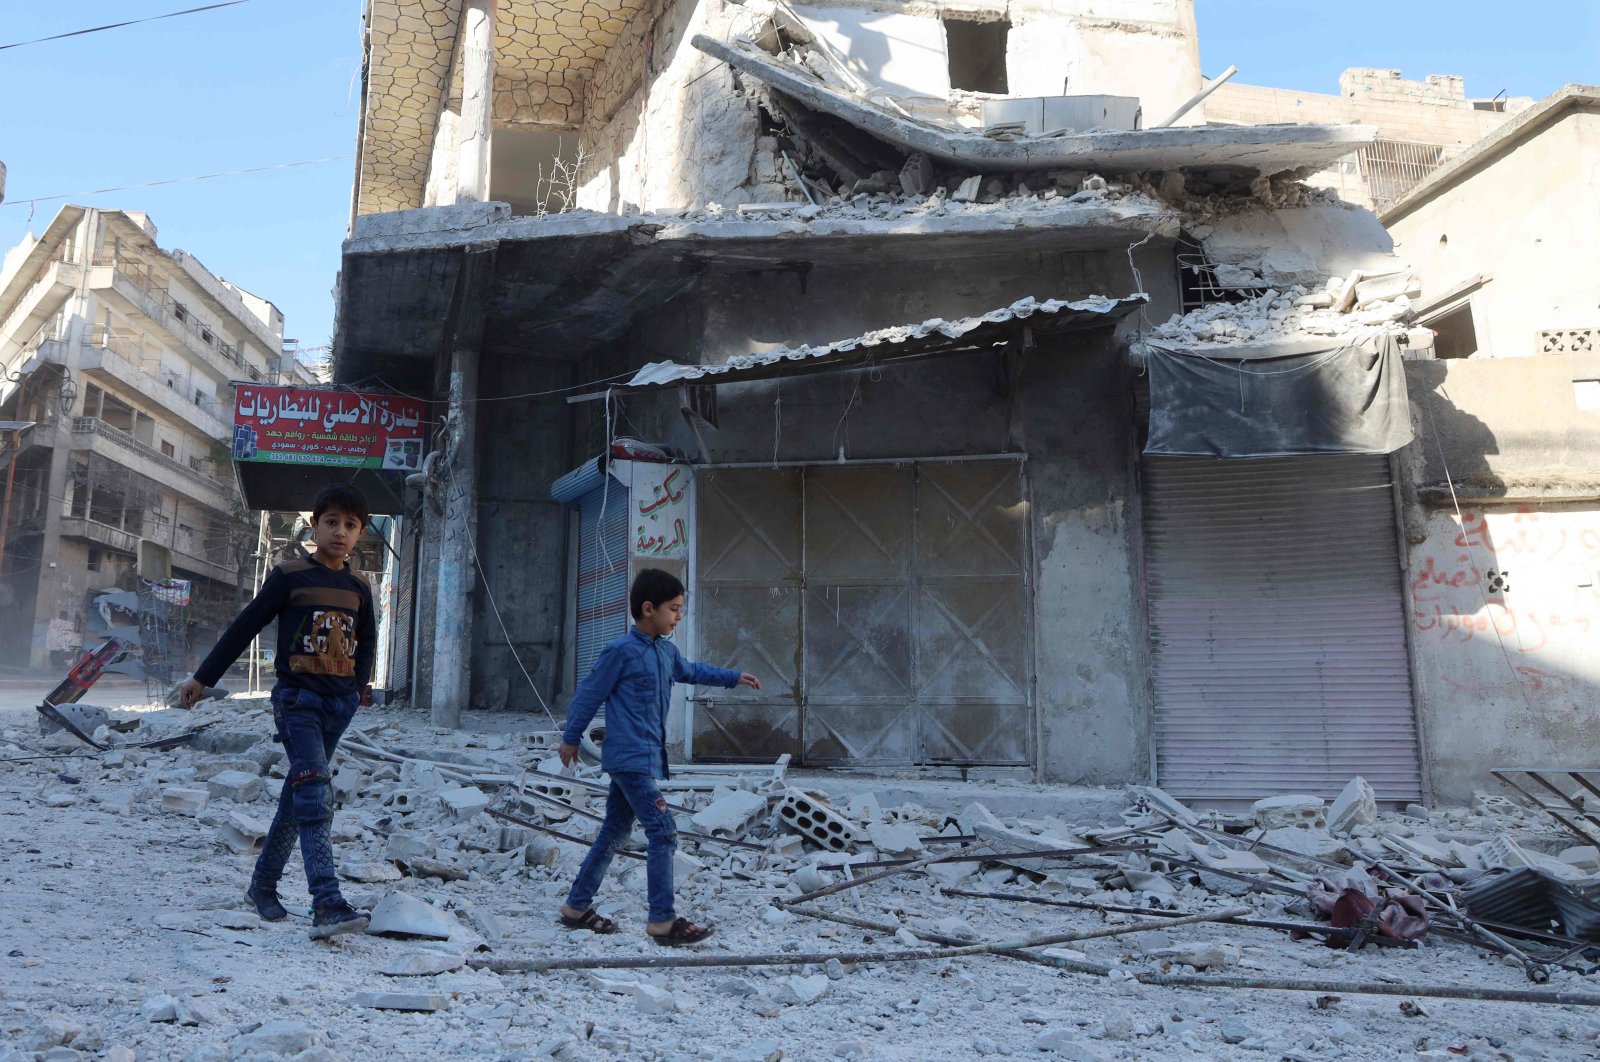 People walk past debris at the site of shelling in the Syrian town of Ariha in the opposition-held northwestern province of Idlib, Syria, Oct. 20, 2021. (AFP Photo)